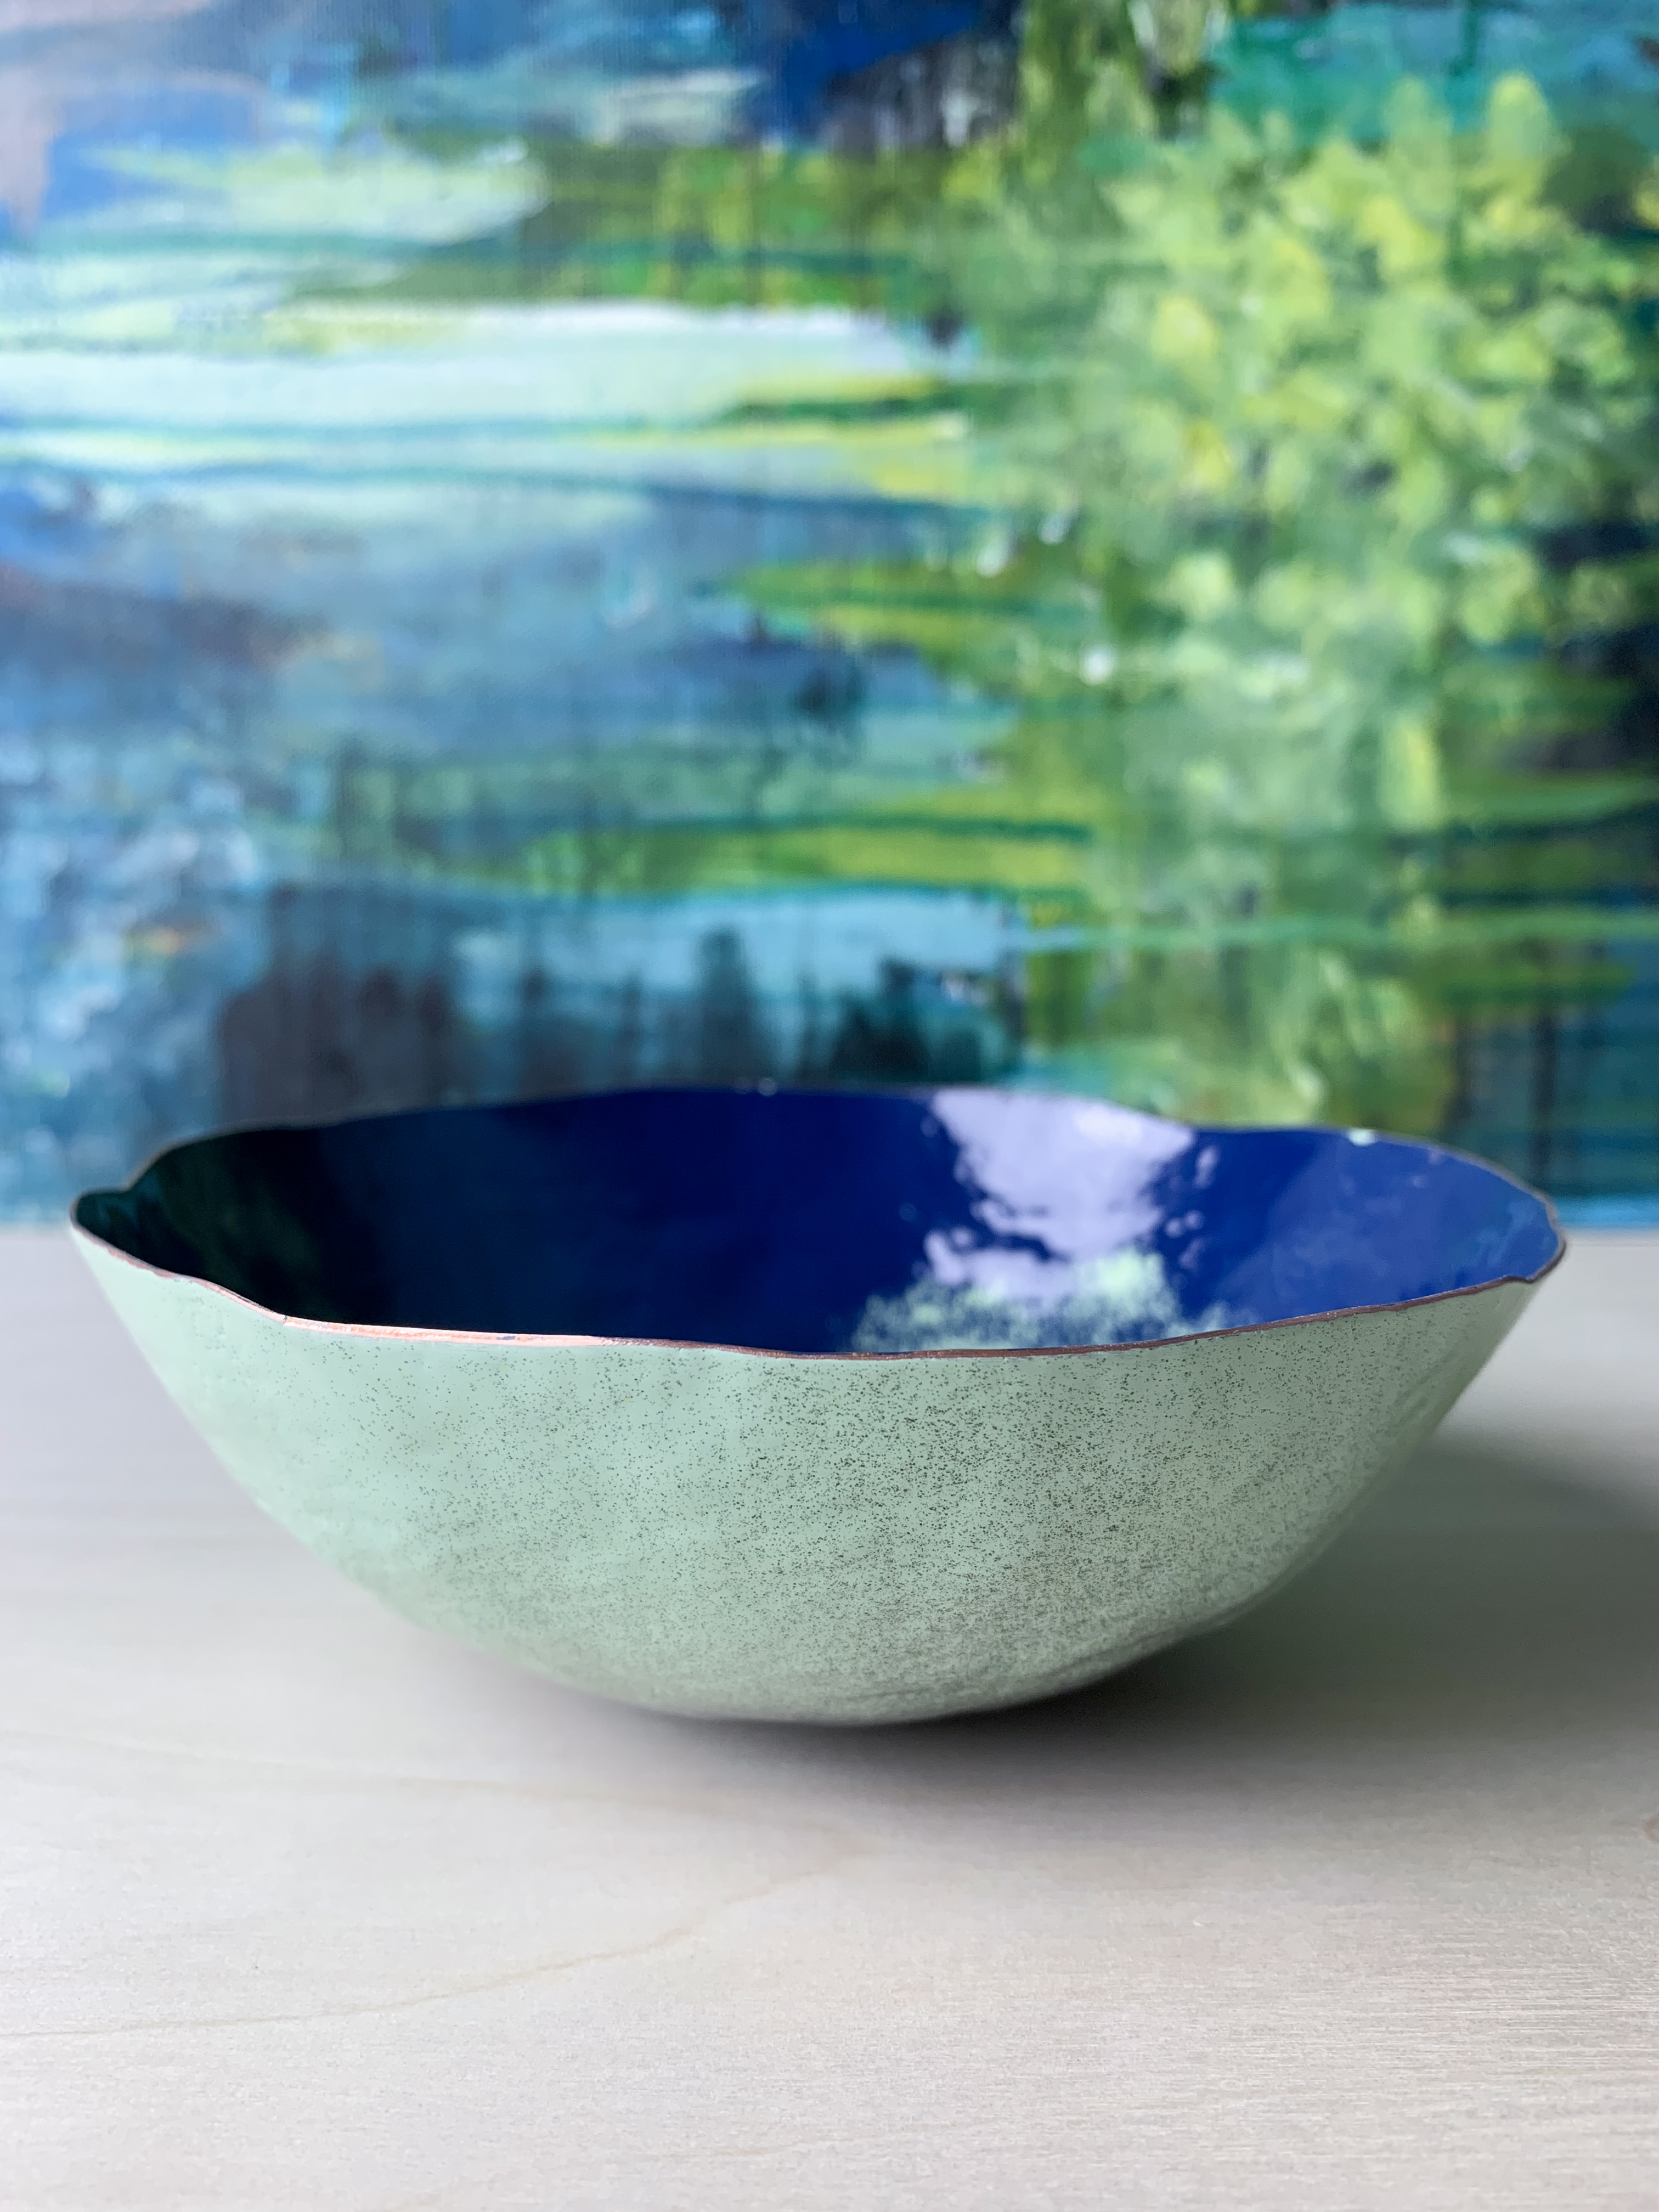 colorful decorative metal raised copper bowl in front of abstract expressionist painting